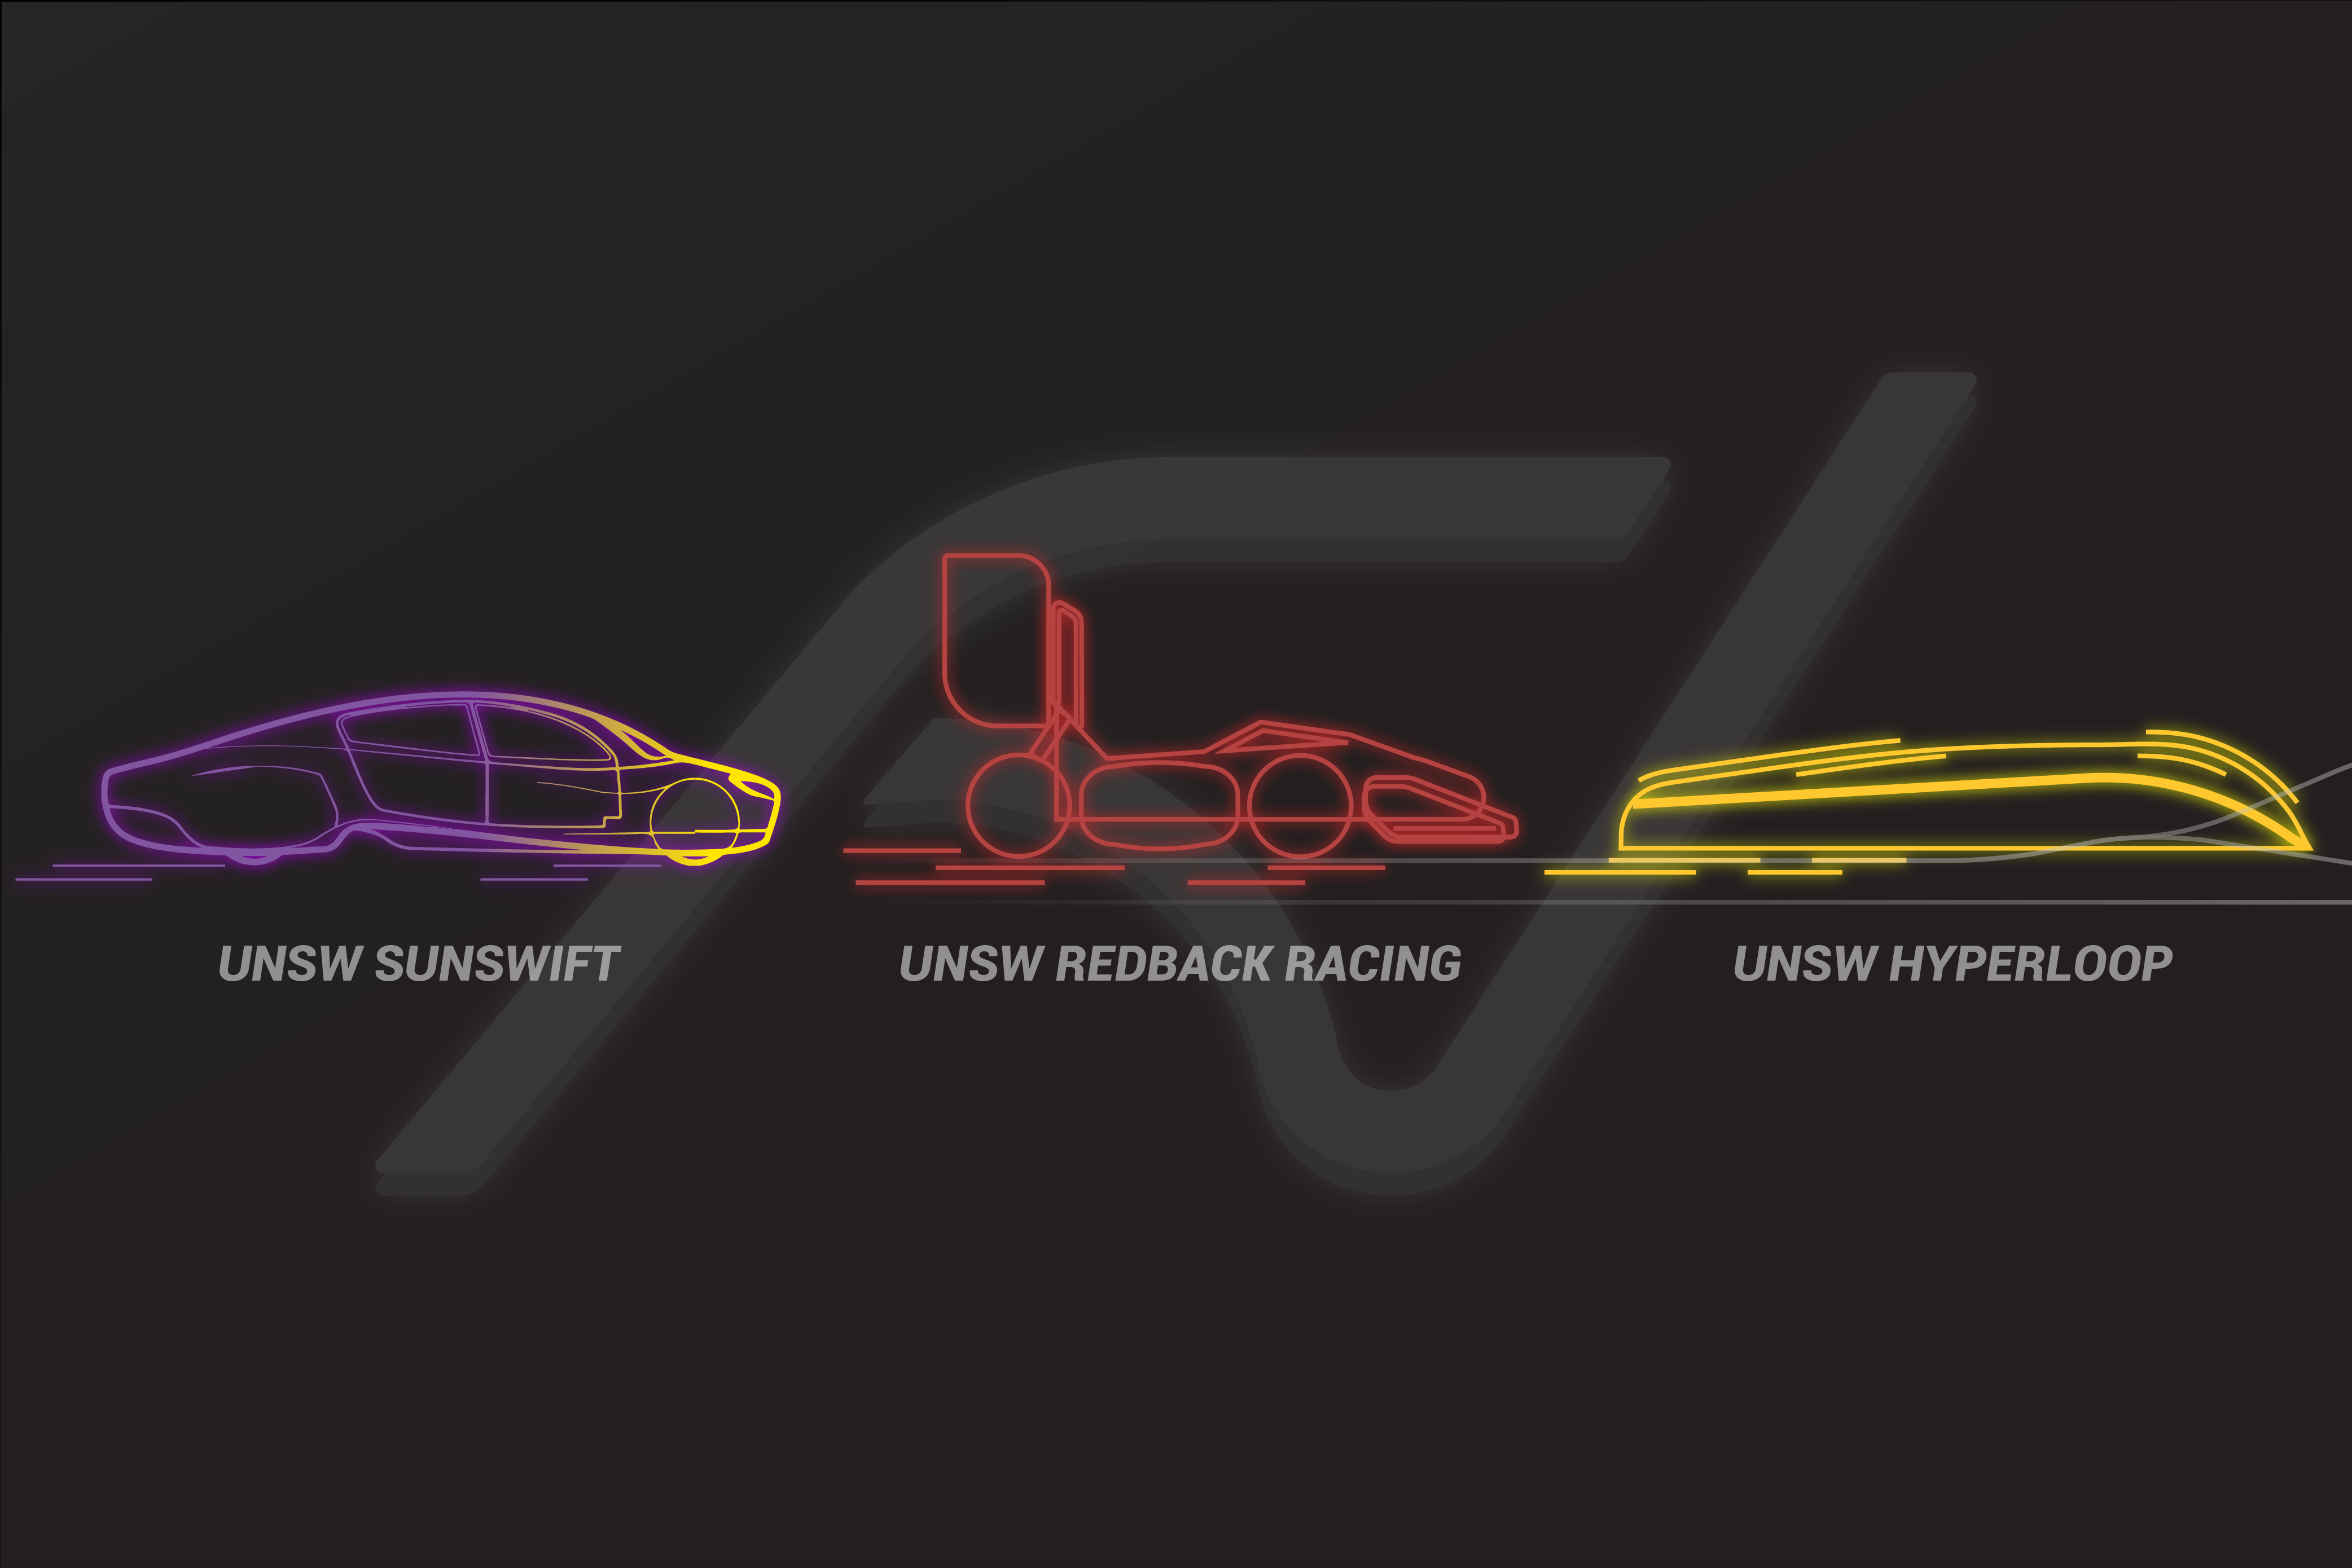 Image 2 of UNSW Future Vehicles